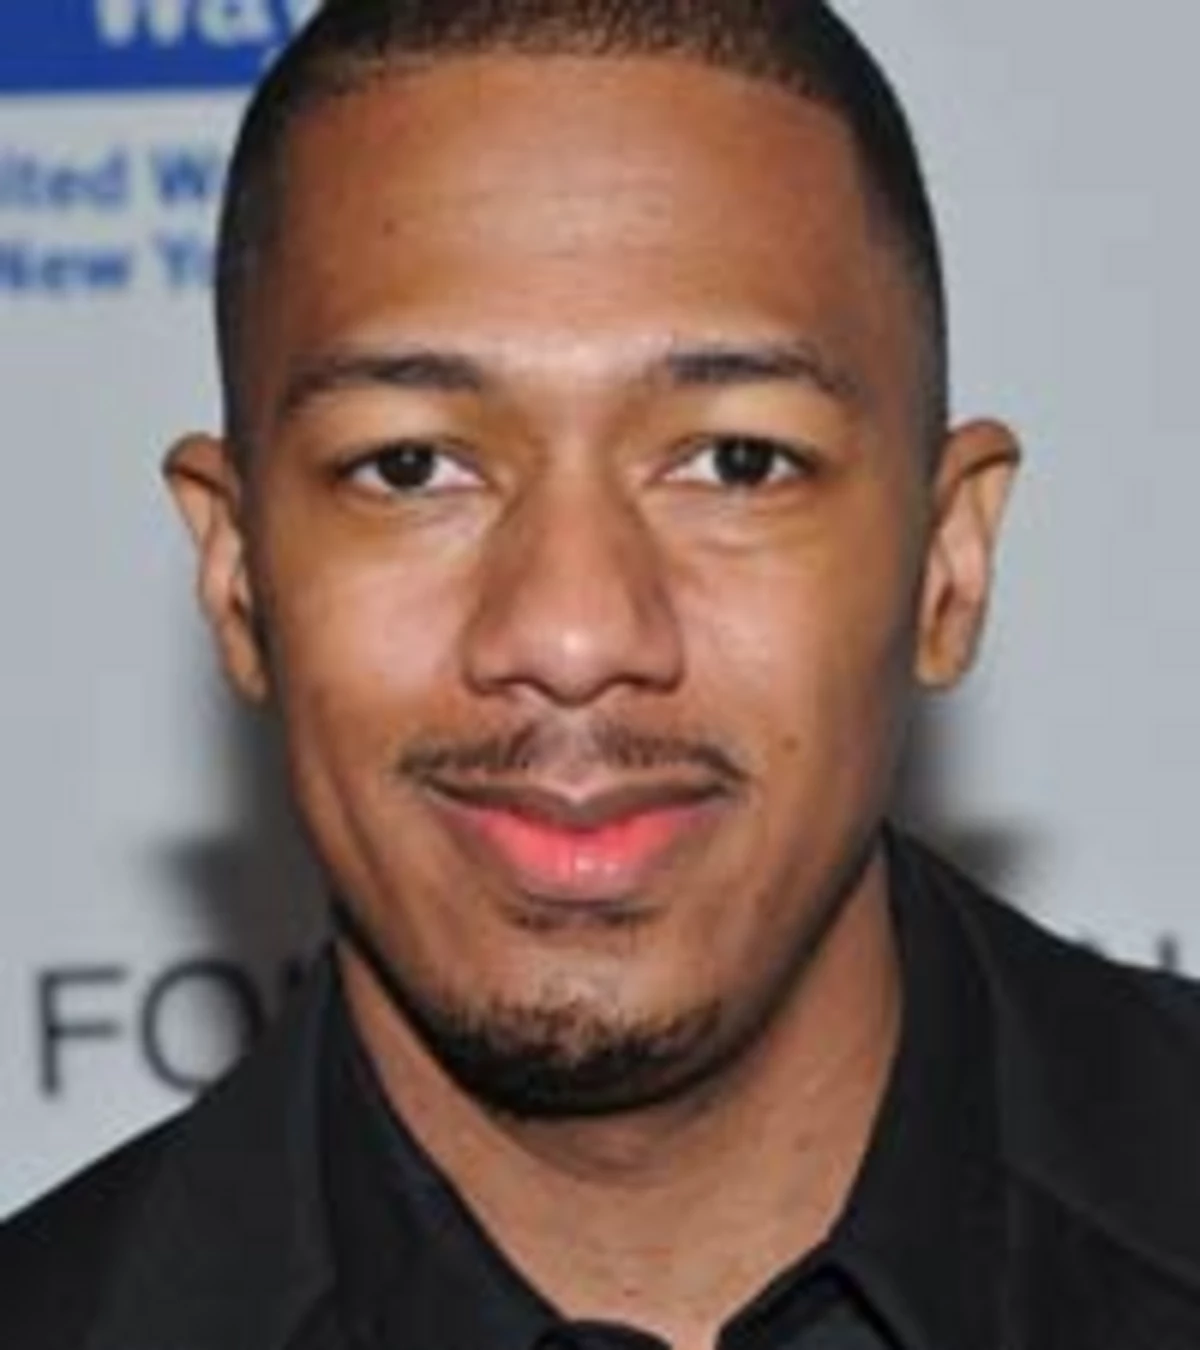 Nick Cannon Quits Radio Show After Being Hospitalized, ‘Needs Sleep’